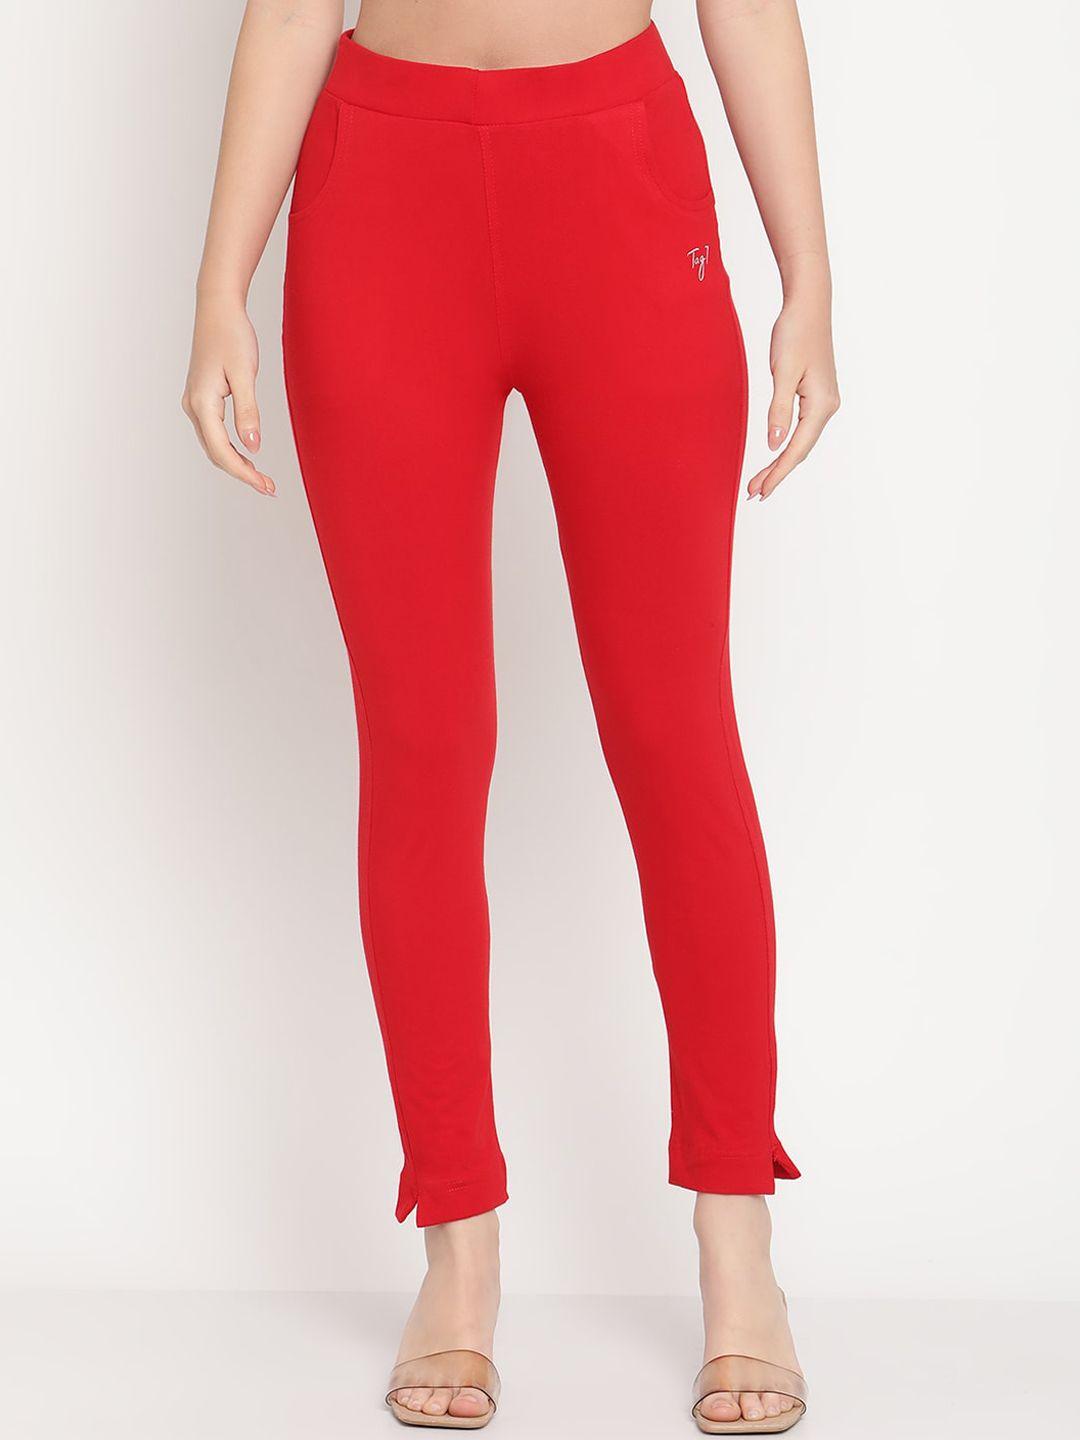 TAG 7 Women Red Solid Ankle-Length Leggings